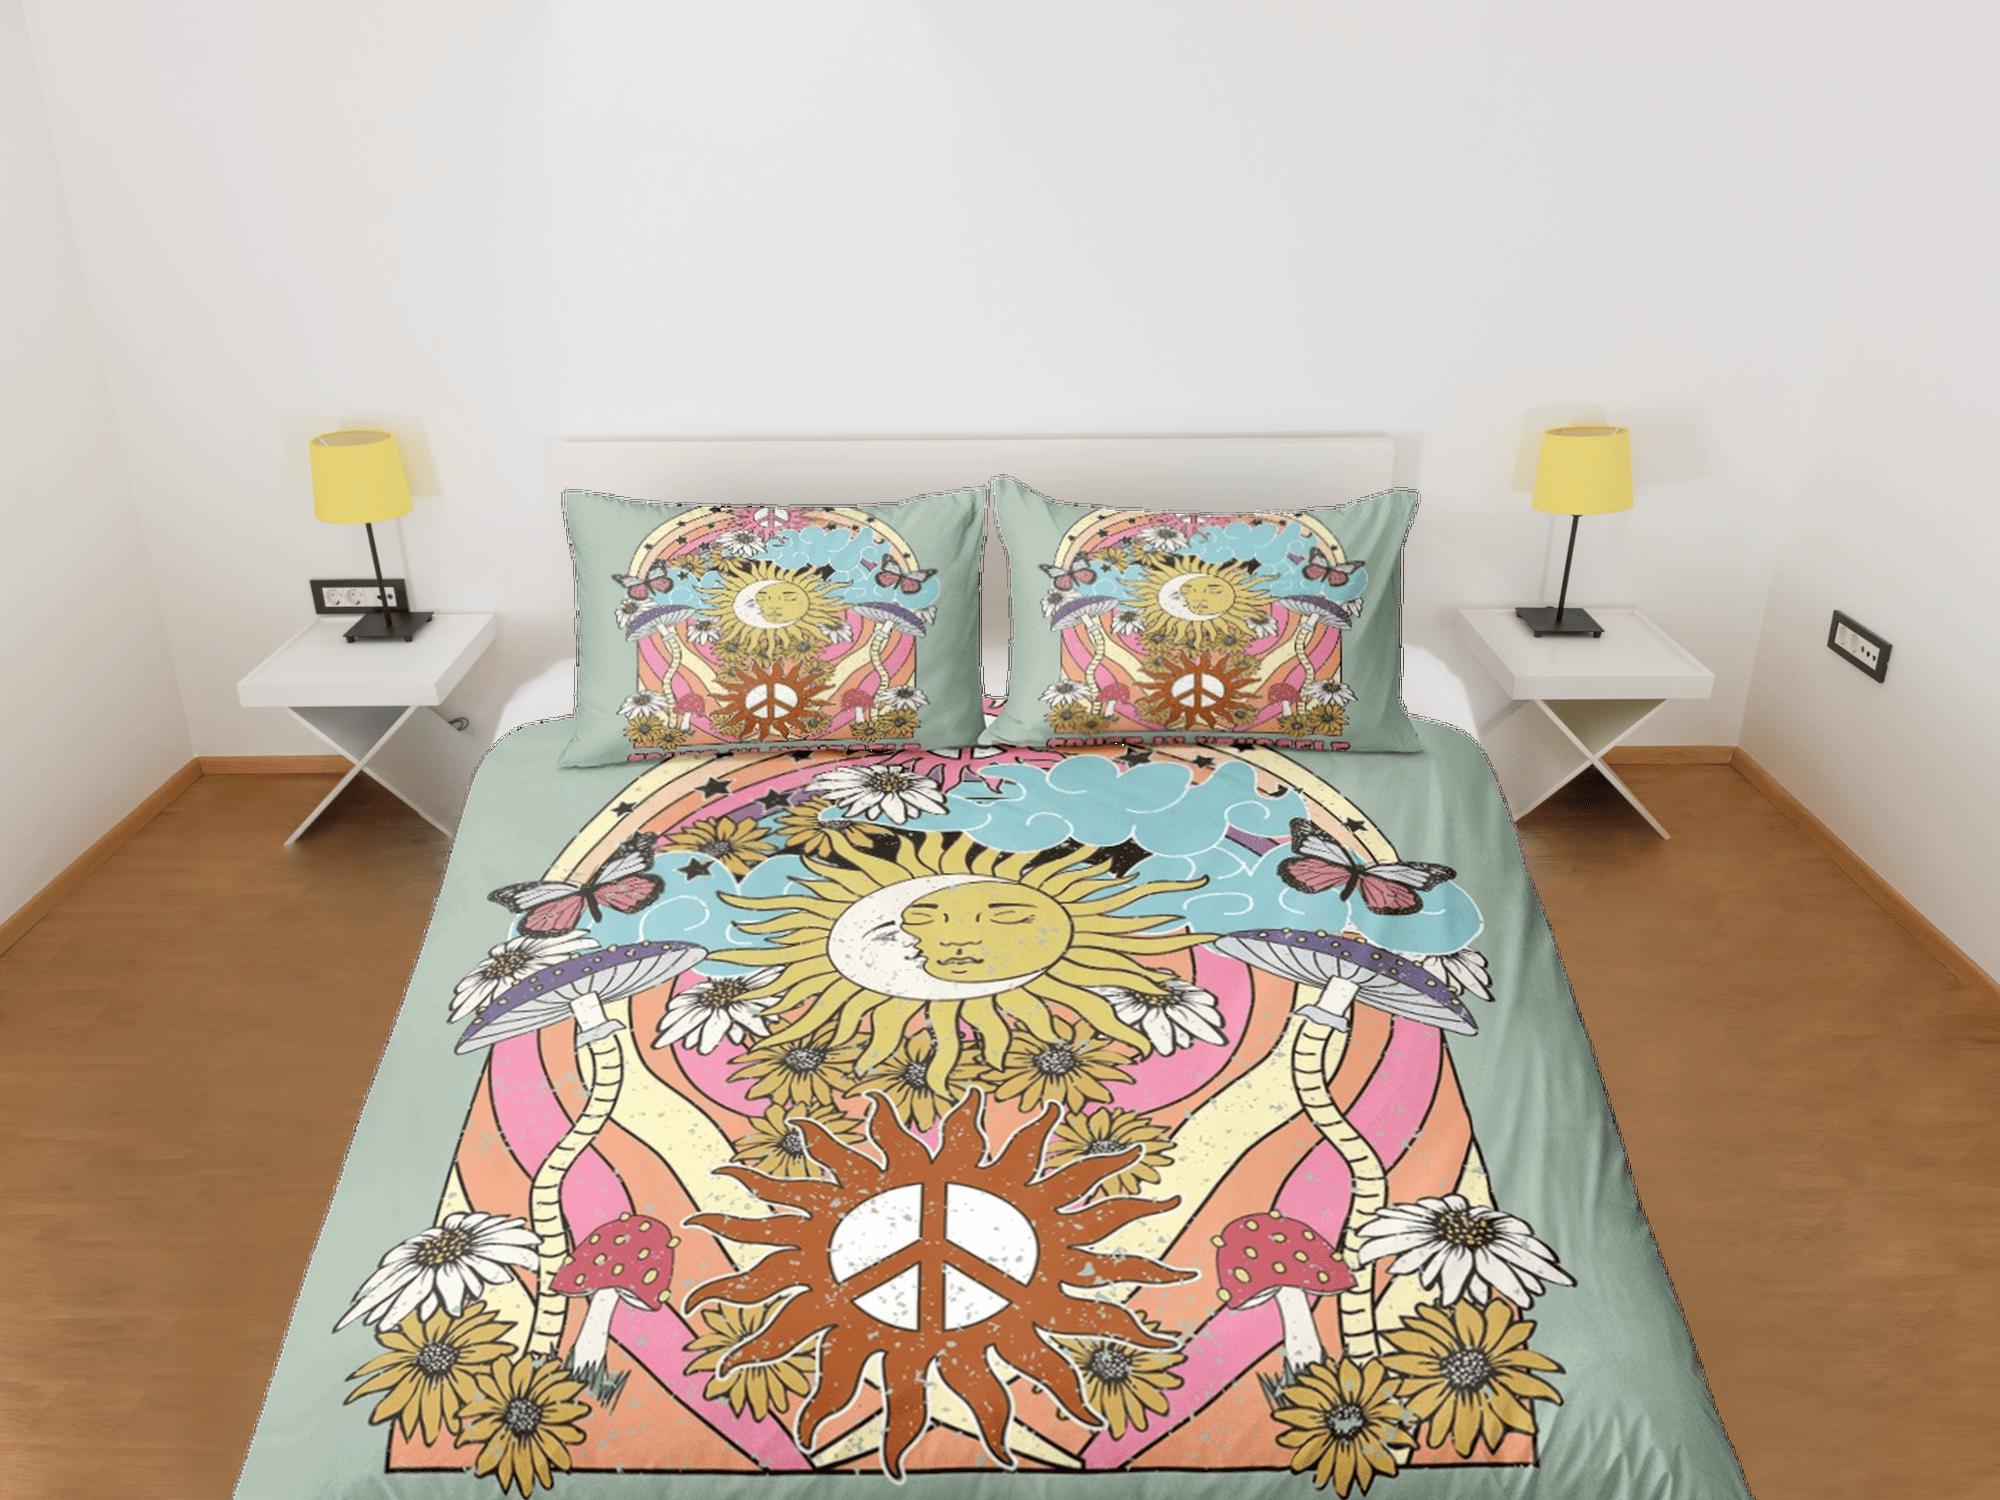 daintyduvet Peace sign 90s nostalgia hippie bedding retro duvet cover set, colorful bedding, teens and adult duvet cover, maximalist decor, sun and moon